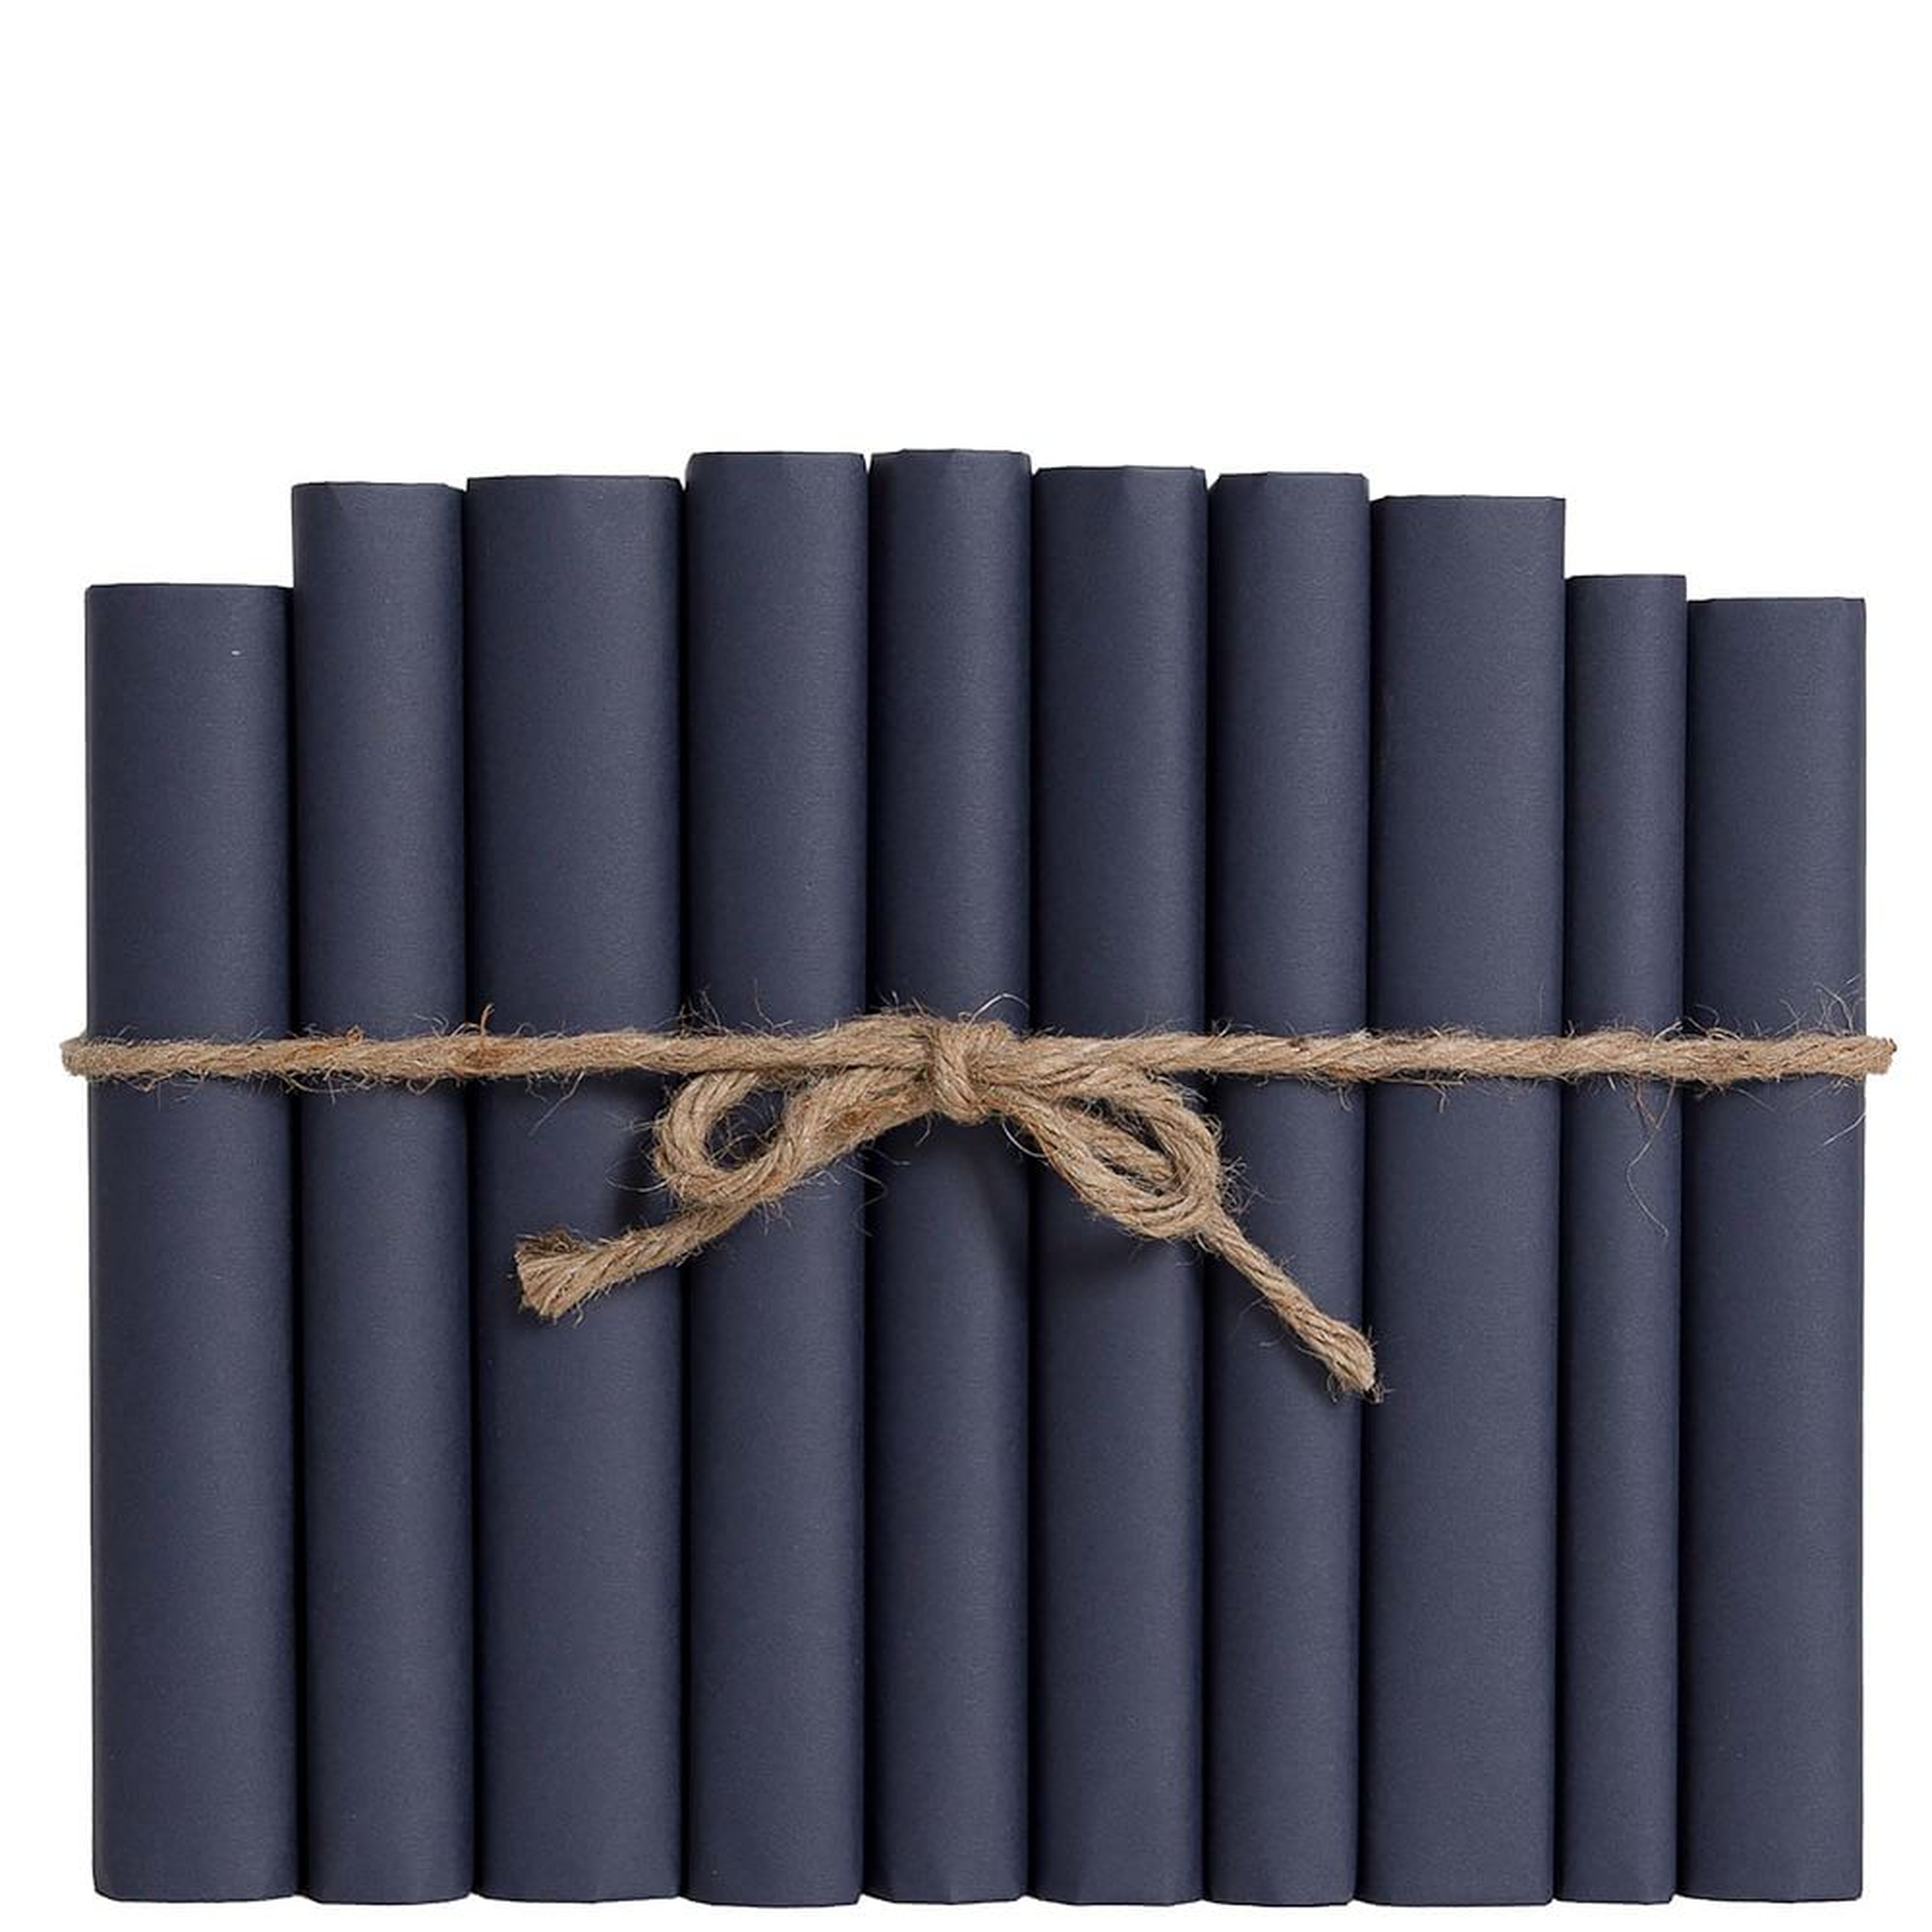 ColorPak Modern Book, Navy Wrapped - West Elm